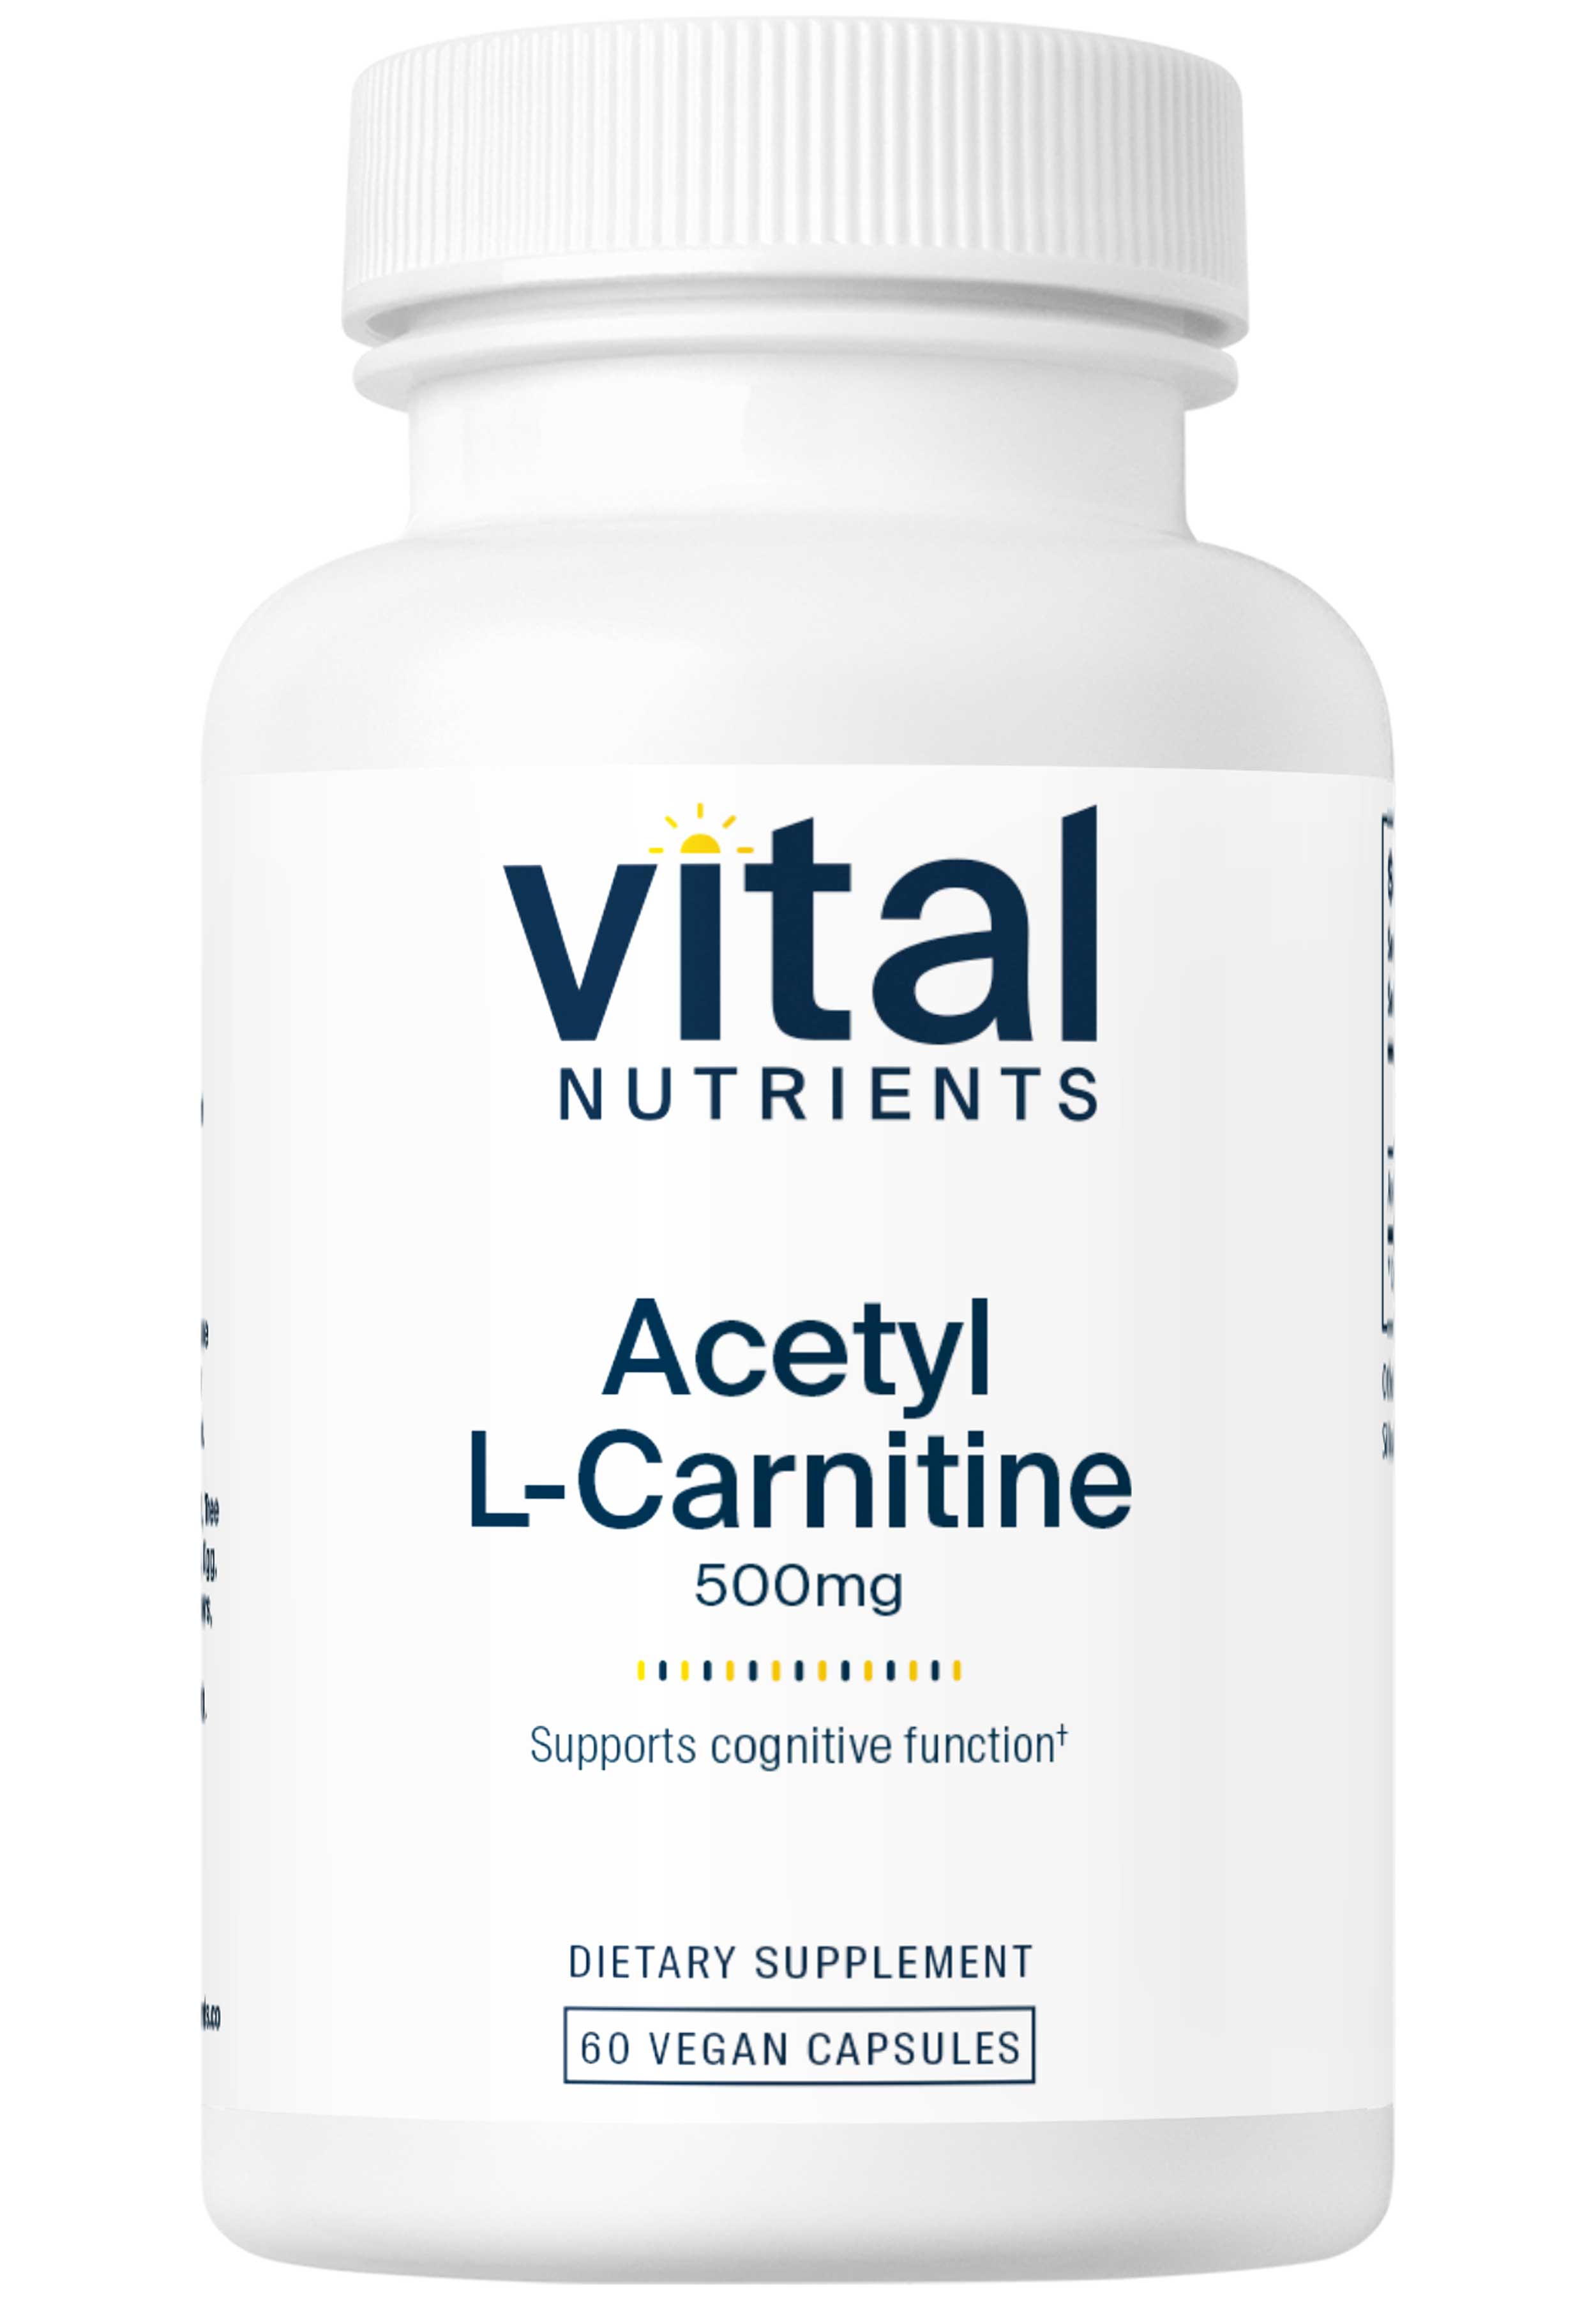 Vital Nutrients Acetyl L-Carnitine 500mg Capsules